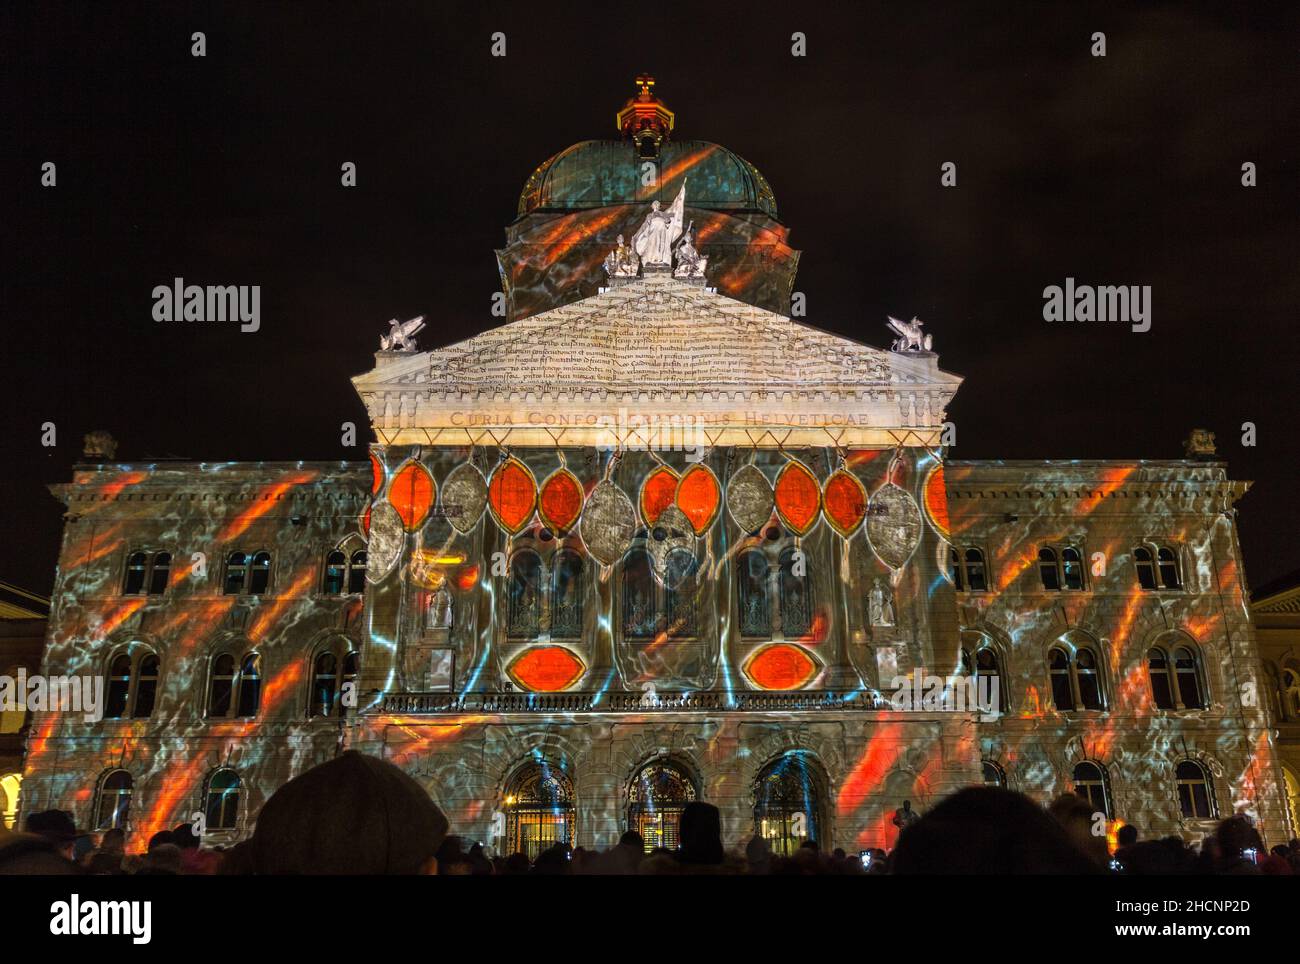 Bern, Switzerland - November 11. 2017: the yearly Light Show 'Rendesz-vous Bundesplatz' projected on Swiss government building. The light and sound sh Stock Photo